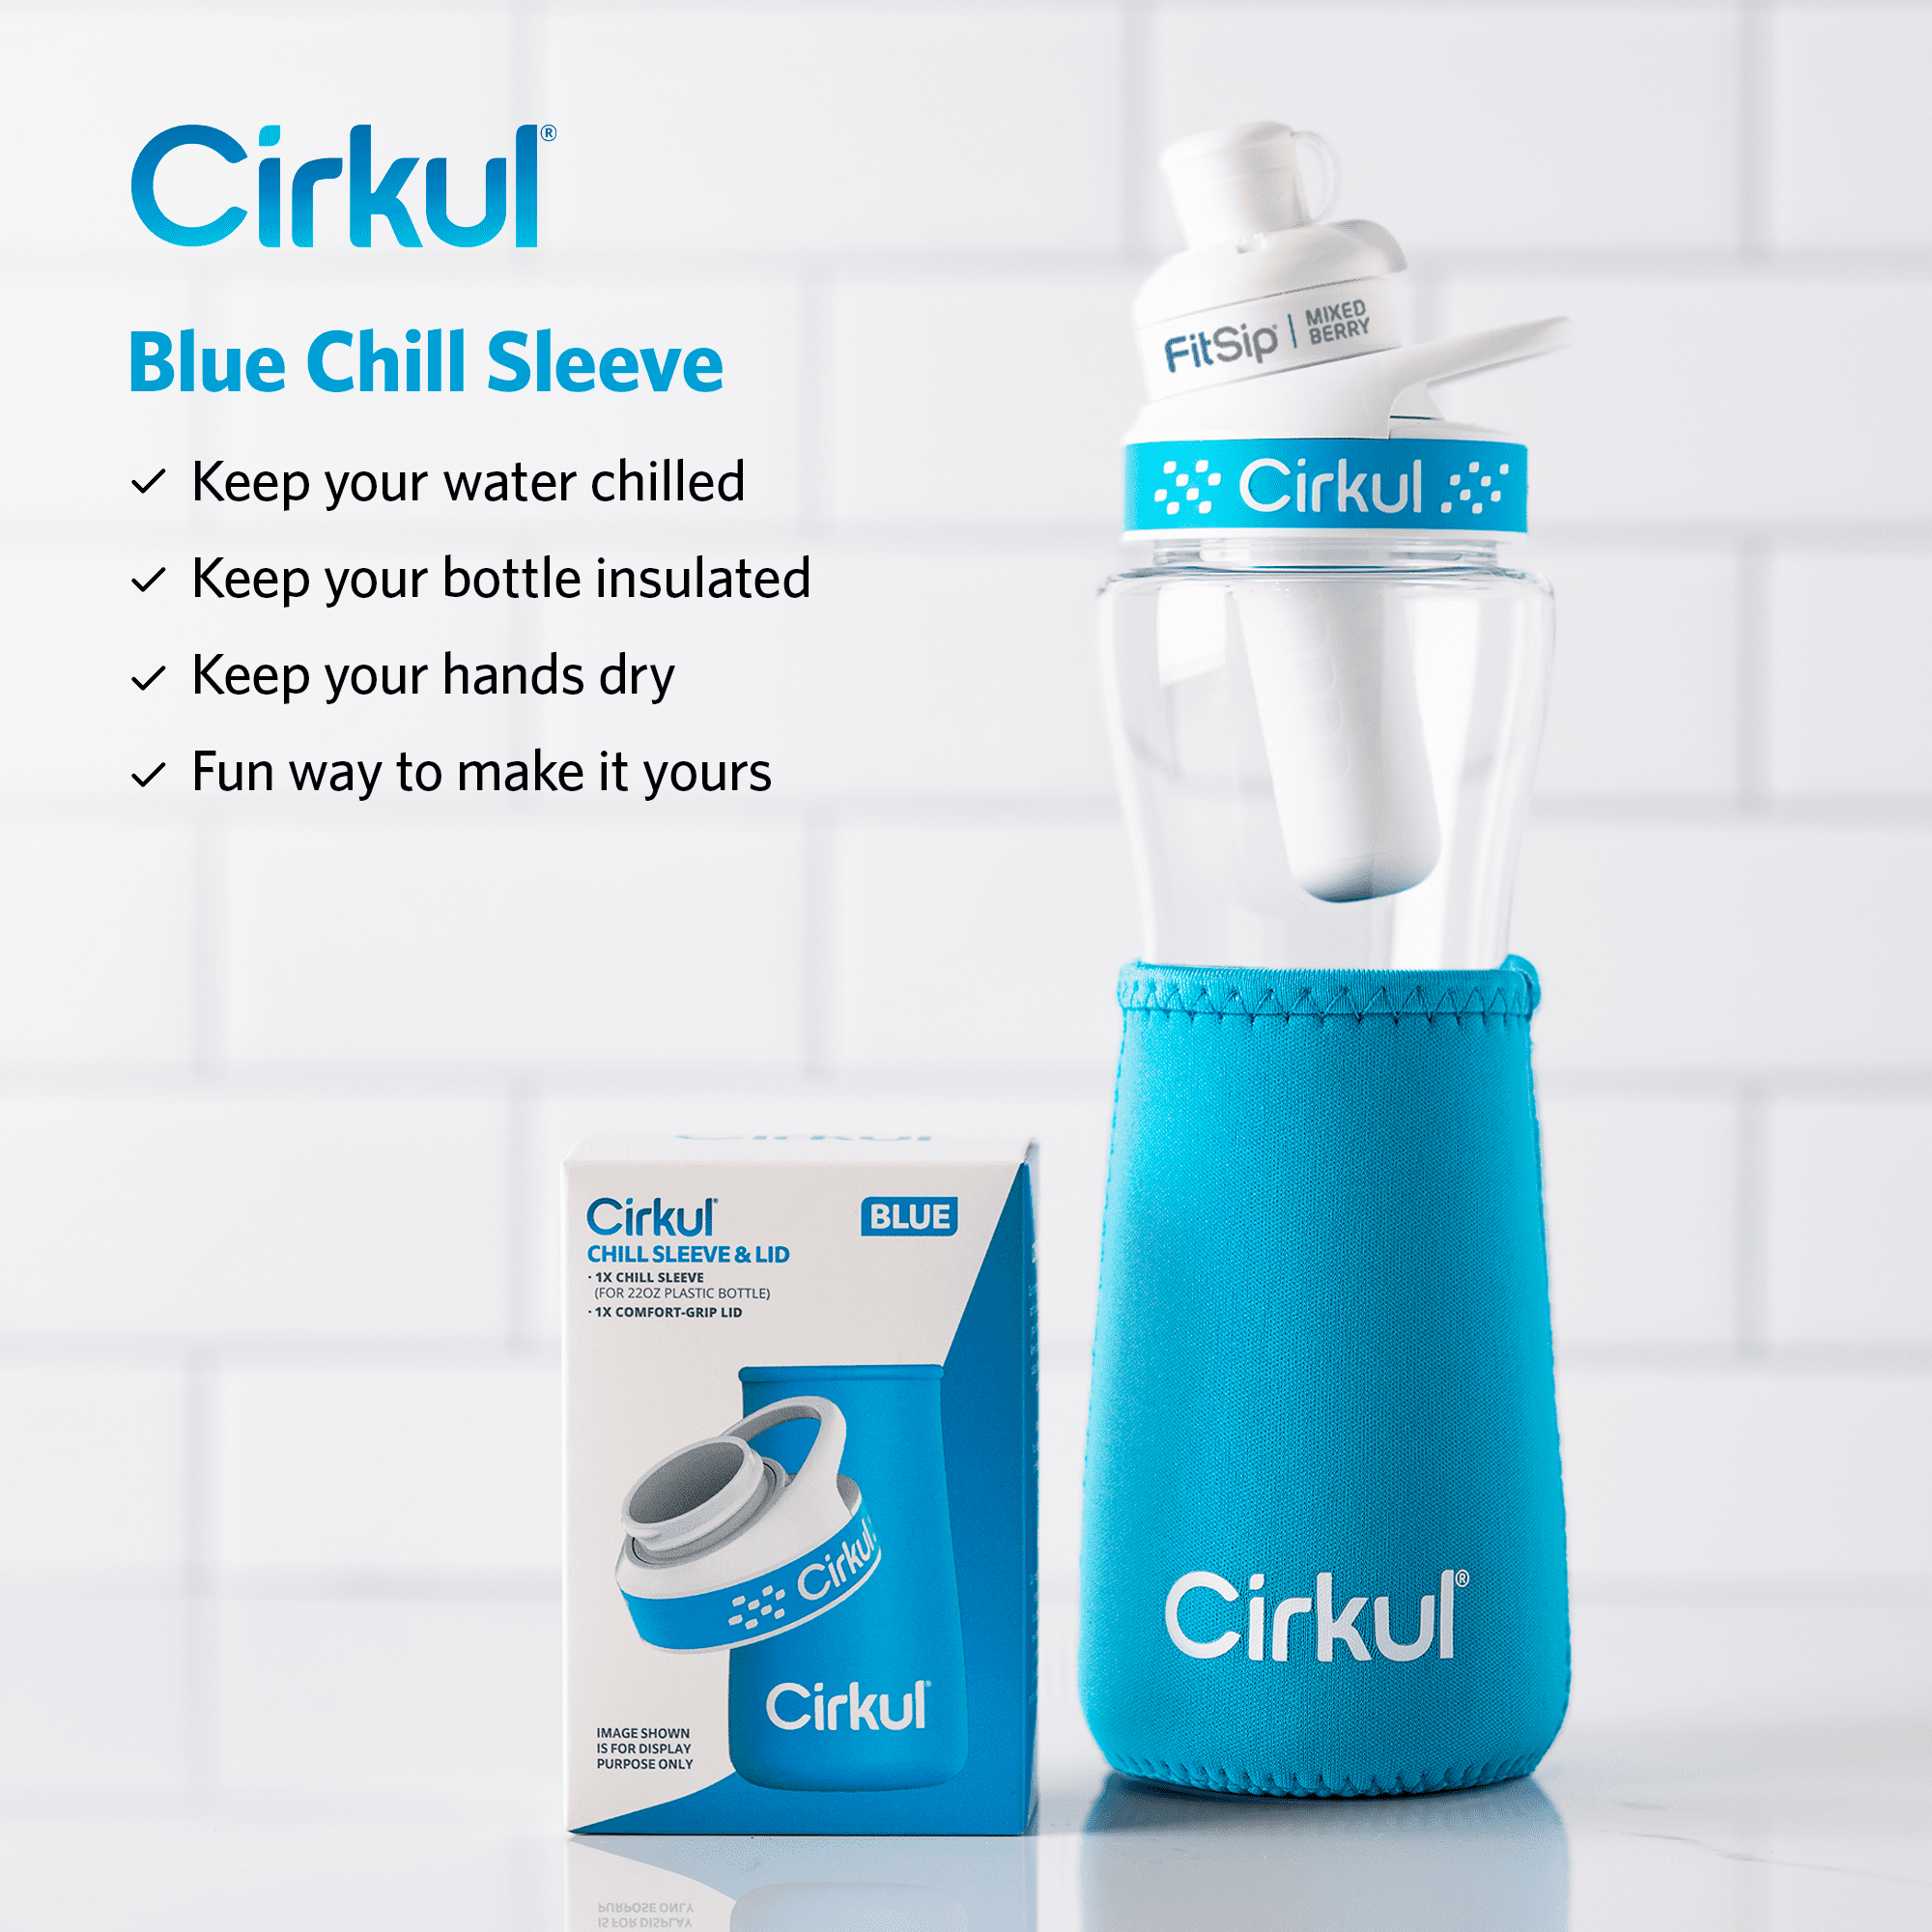 We LOVE our cirkul water bottle! It's also a hit with the kiddos! Th